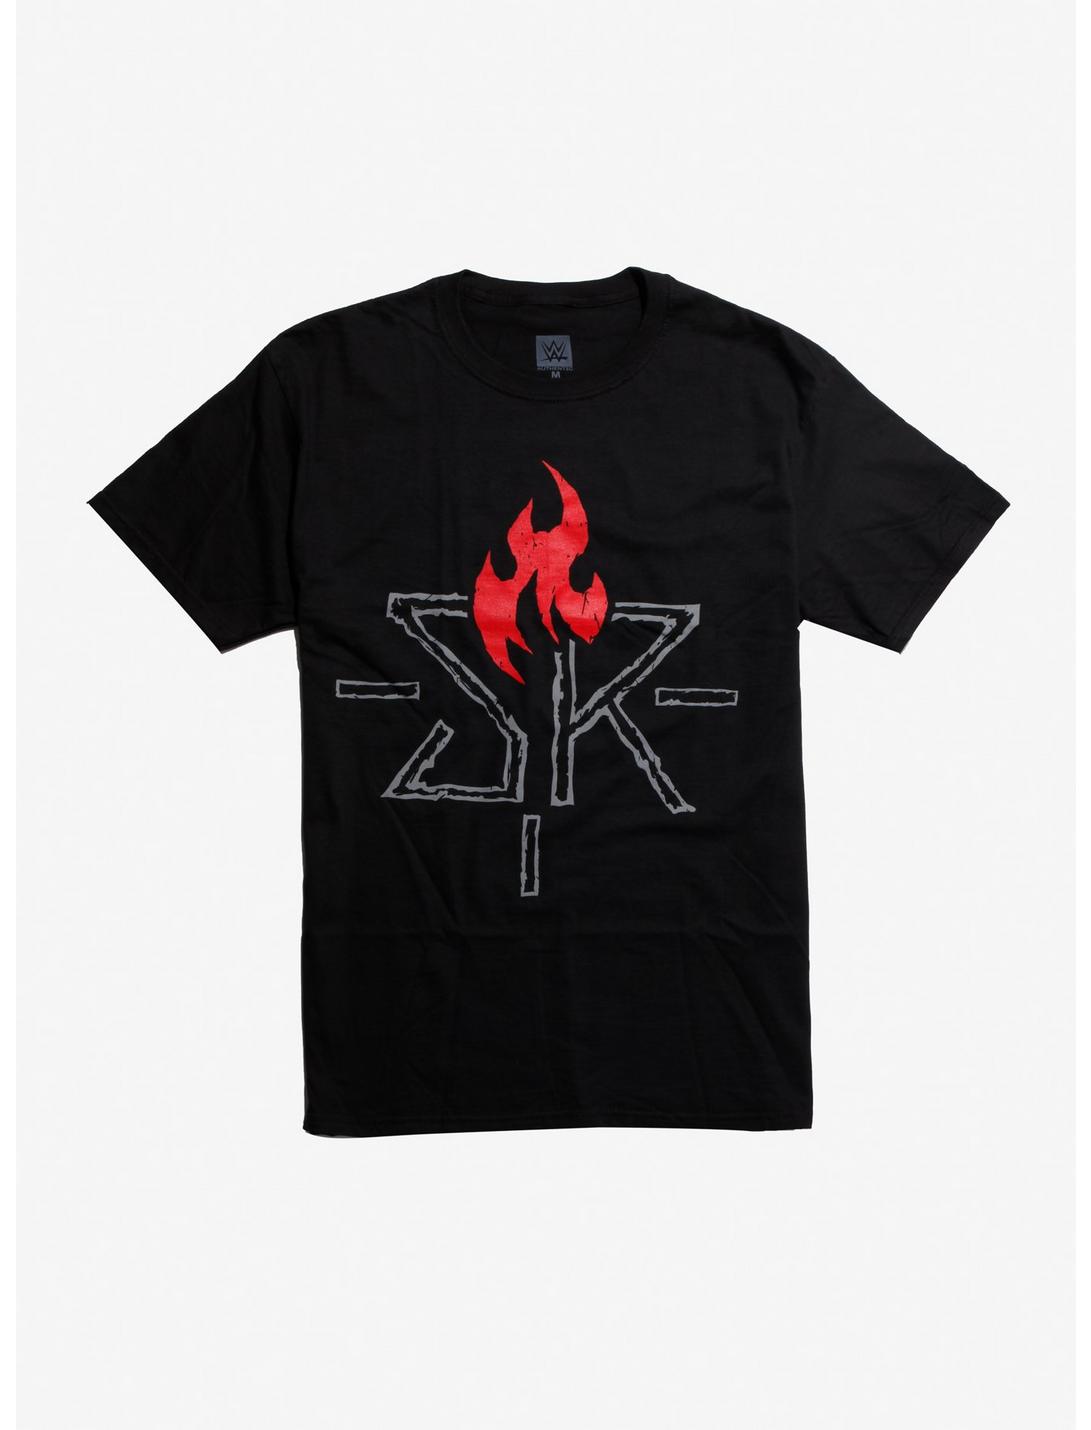 WWE Seth Rollins Ignite the Will T-Shirt, RED, hi-res